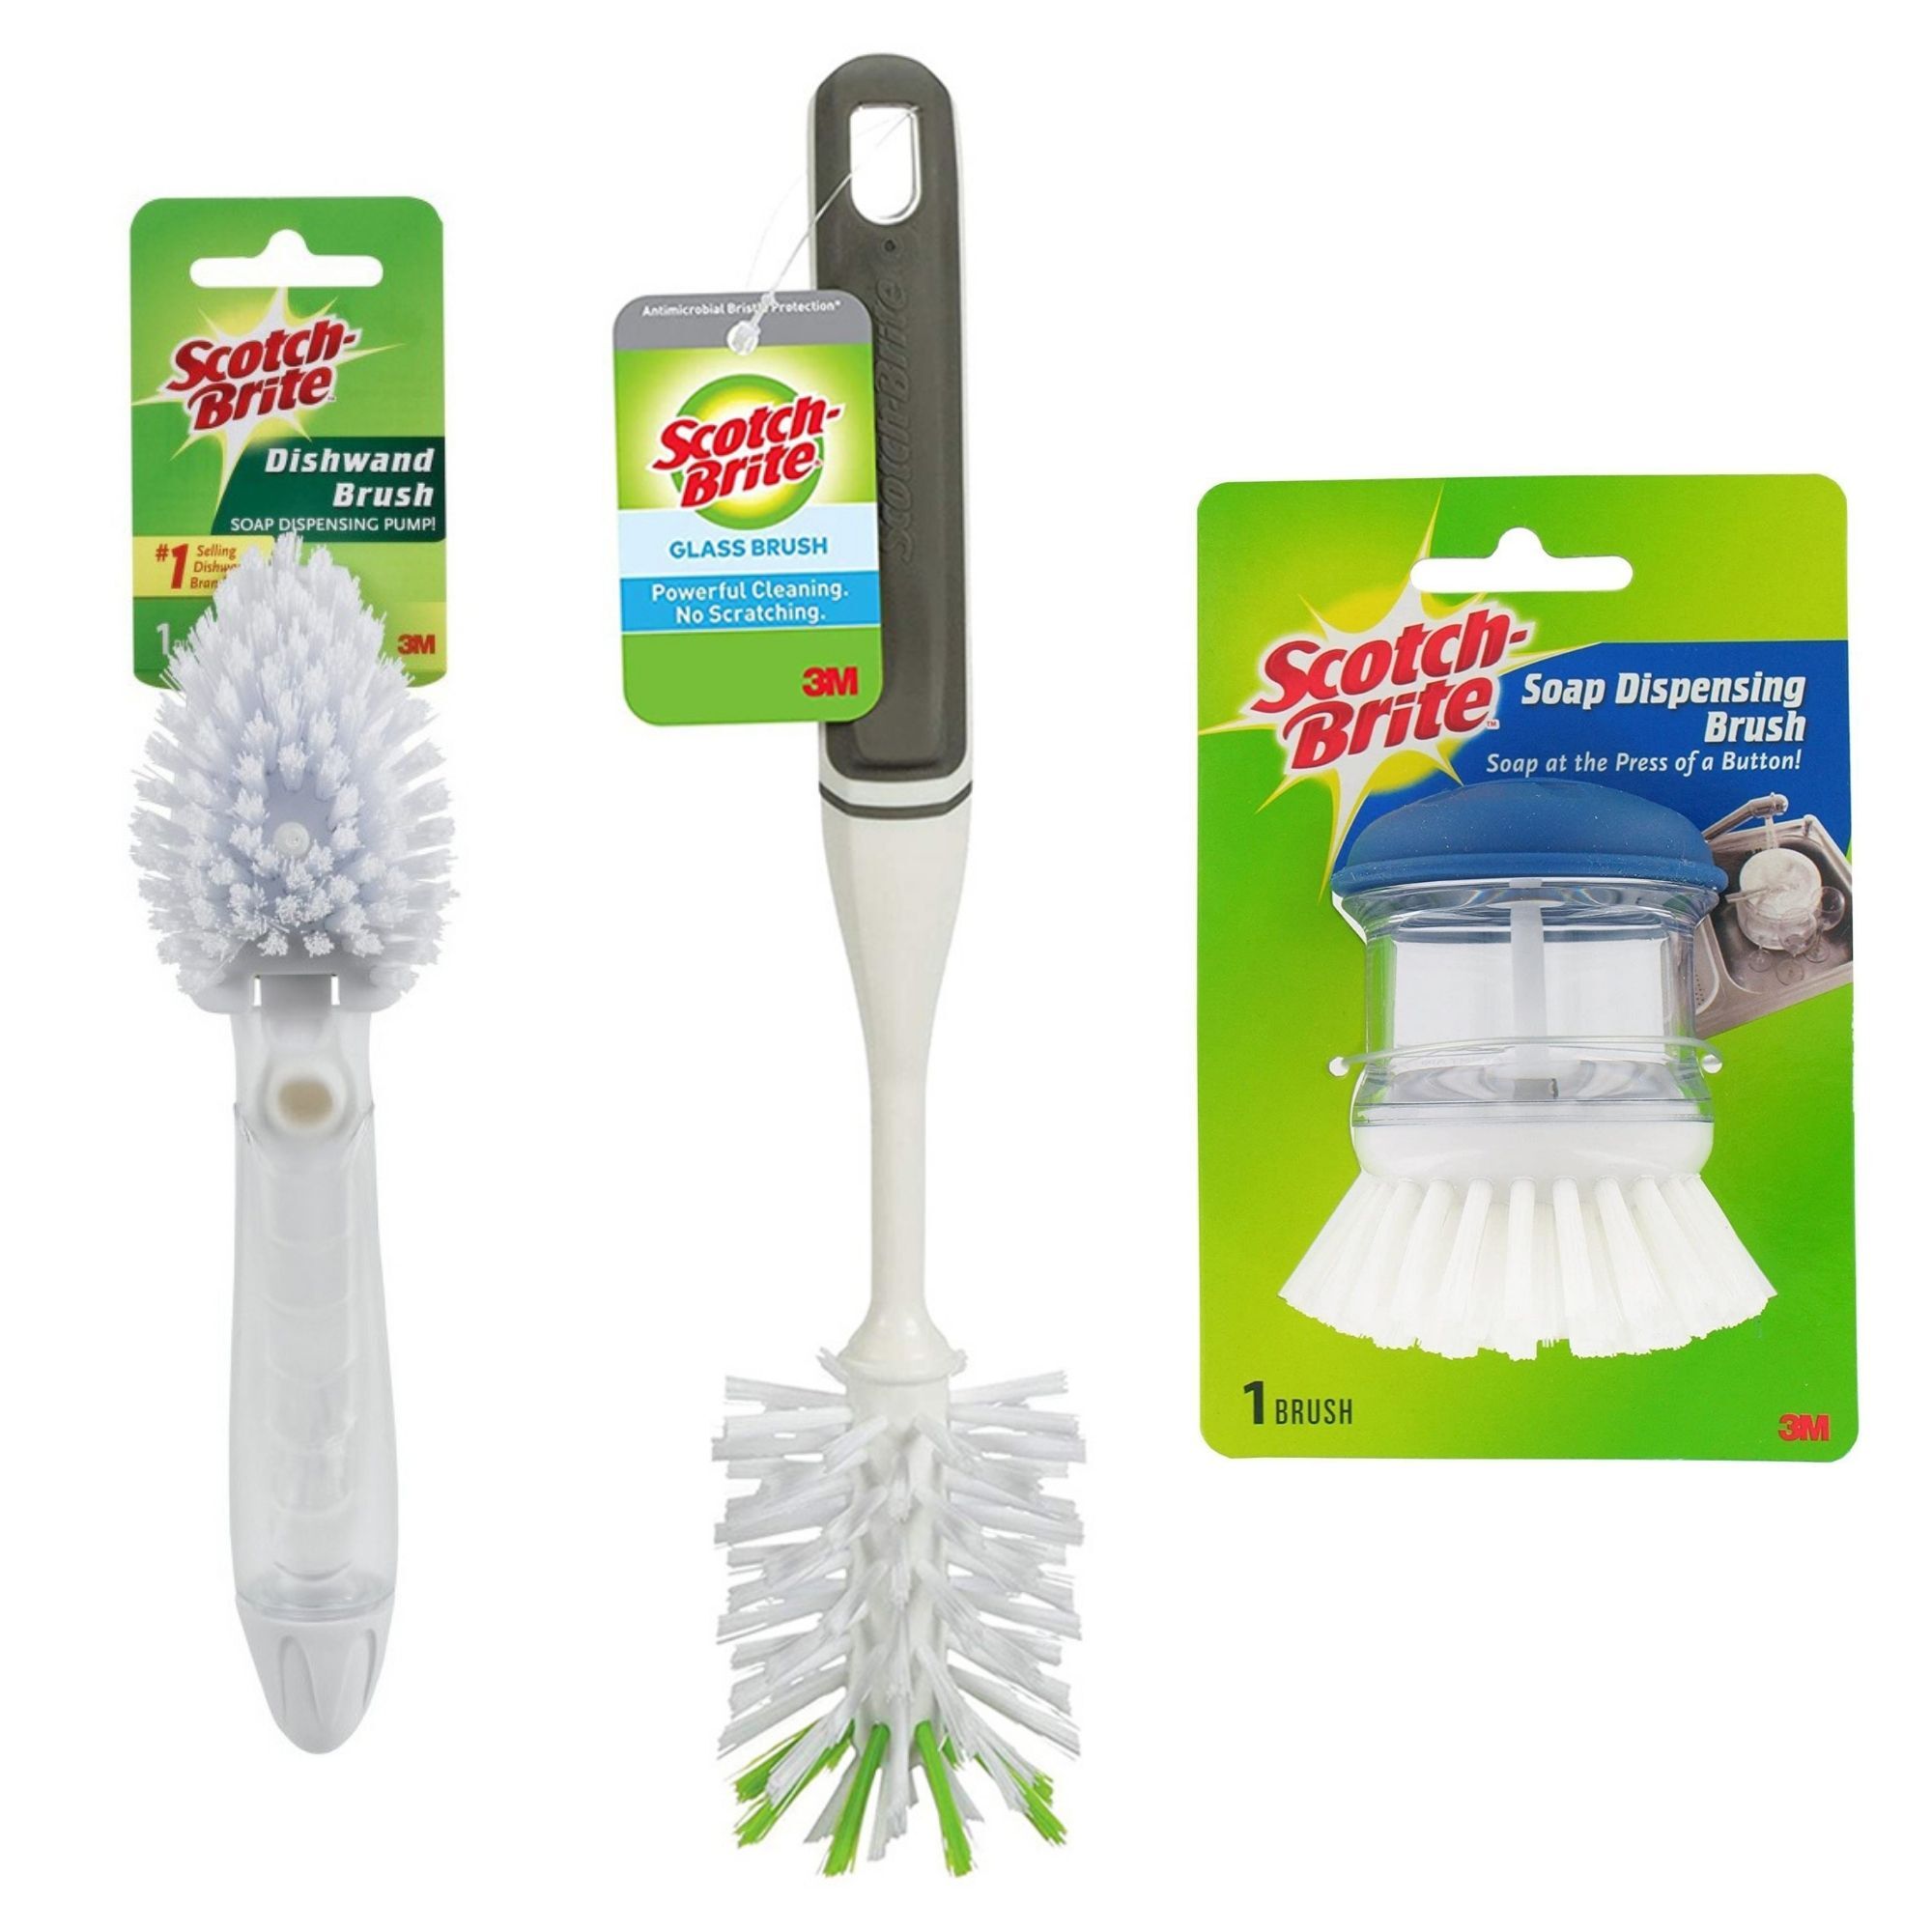 3M SCOTCH BRITE Toilet Bowl Cleaner Scrubber Brushes 30 Refills Freeship&Track 